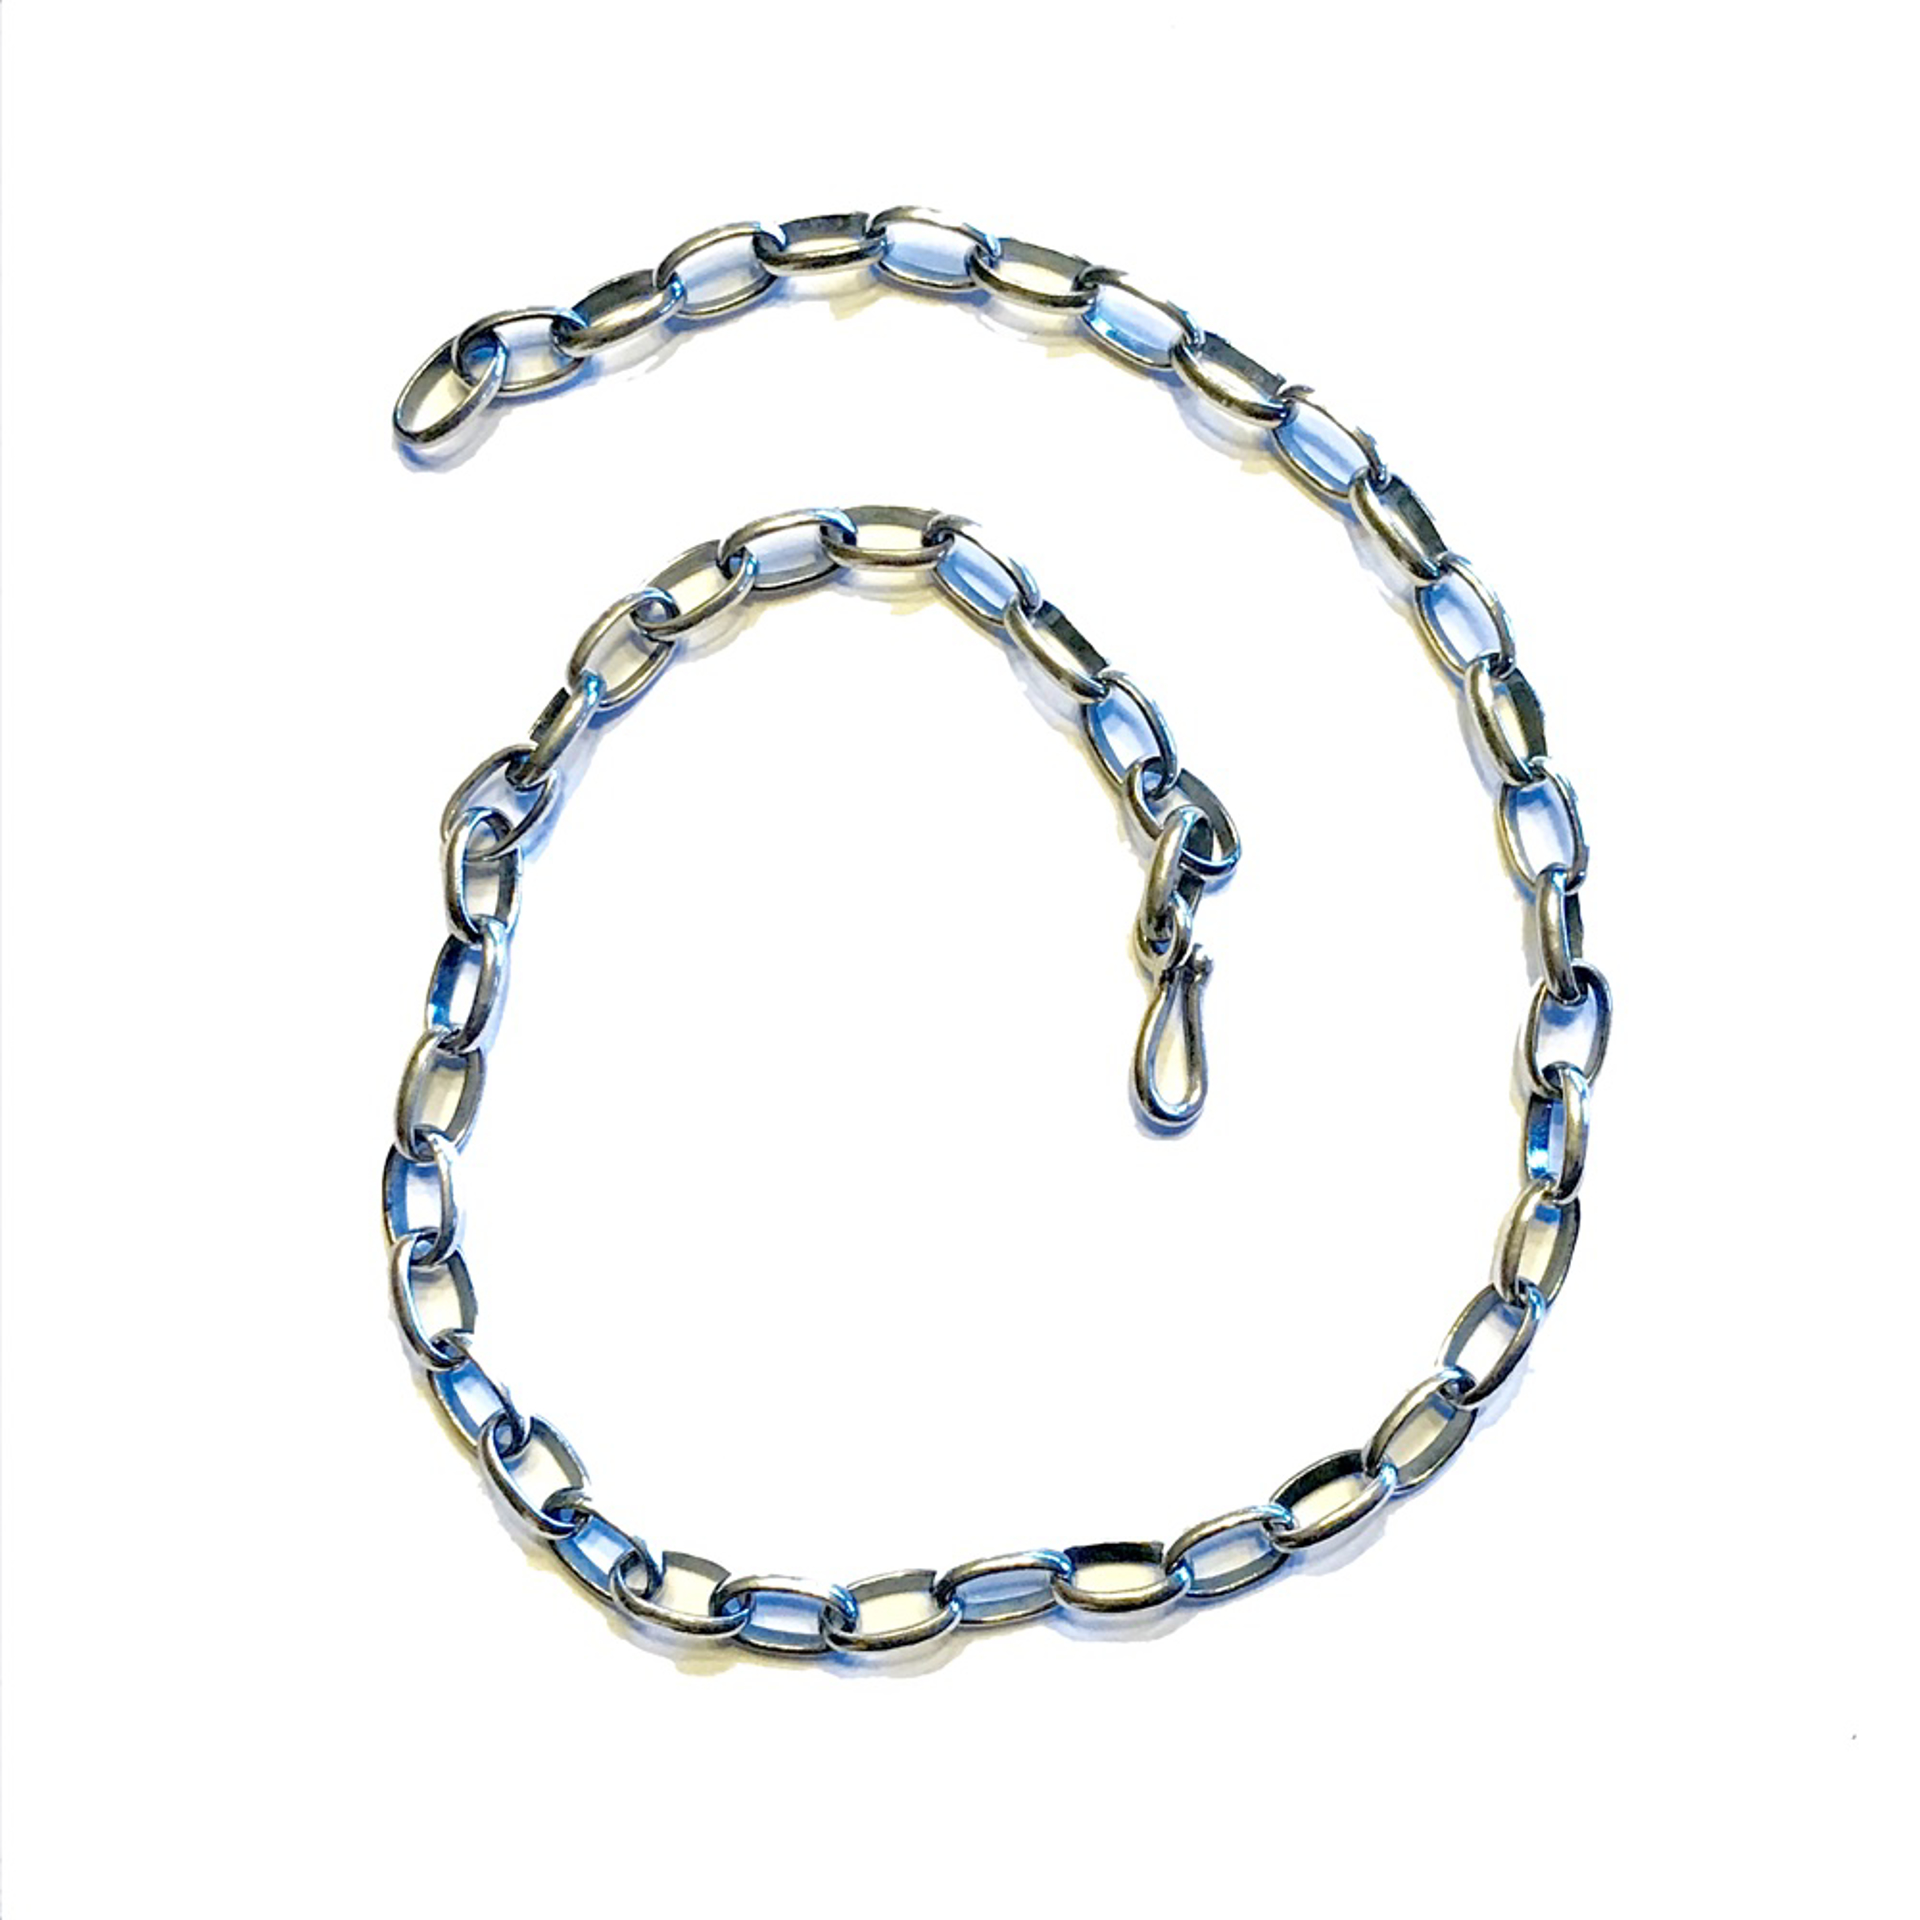 Necklace - 18" Large Link Chain, Sterling Silver by Dan Dodson